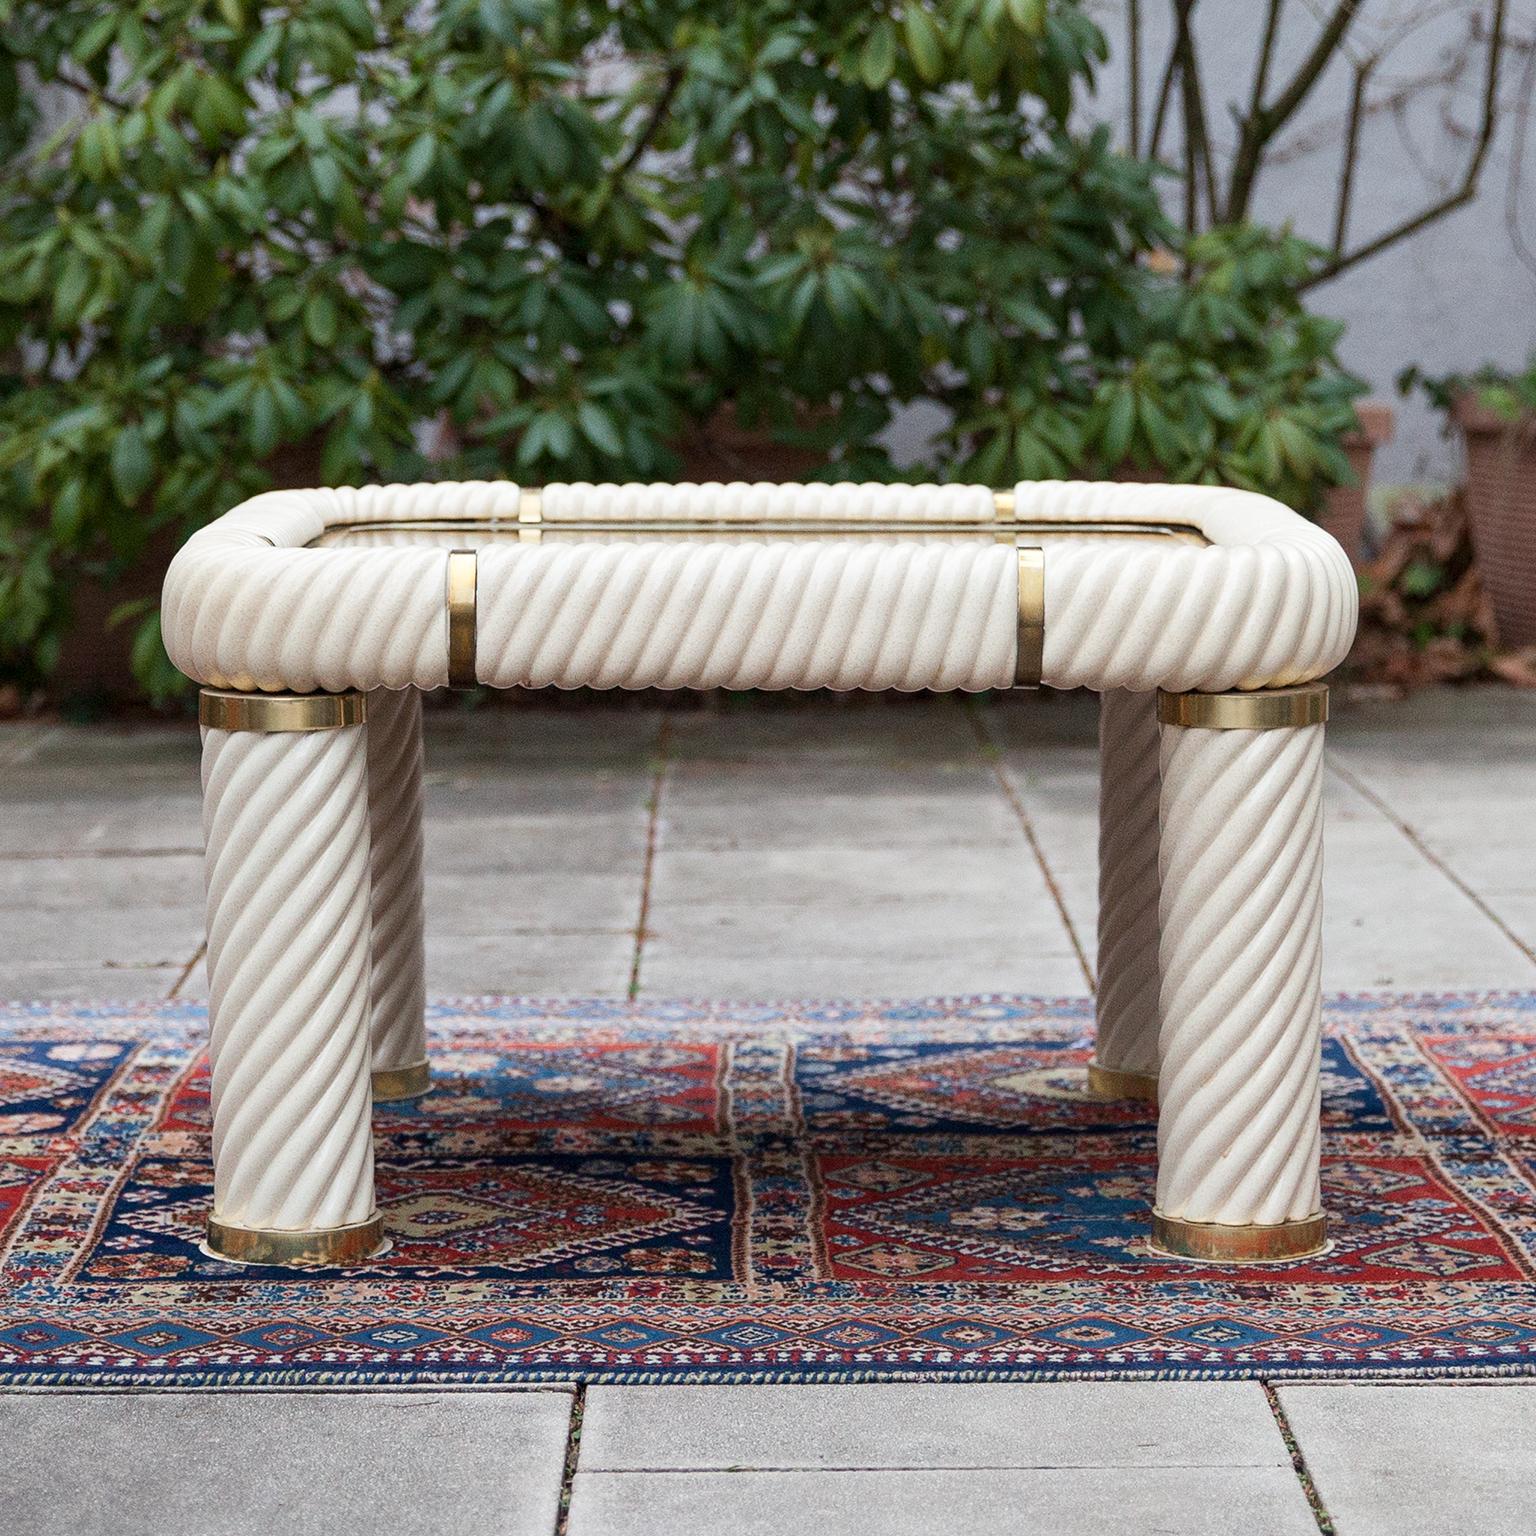 Elegant Hollywood Regency porcelain and mirrored glass squared coffee table. Designed by Tommaso Barbi in the 1970s. This remarkable piece features spiral-form ceramic porcelain column legs and a mirrored bronzed glass top with solid brass finishes